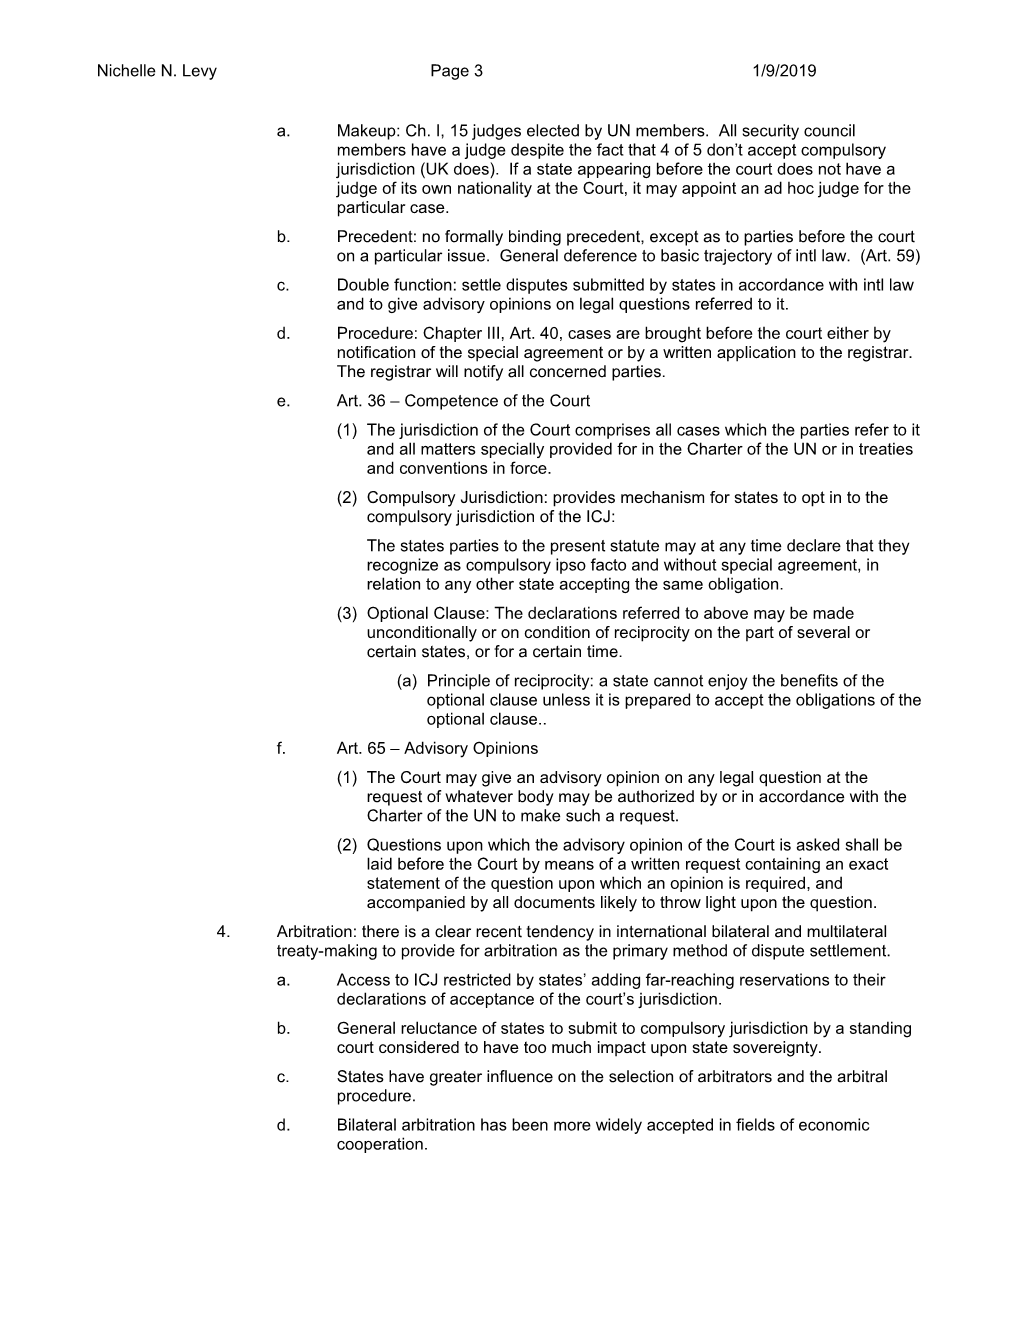 Int L. Law Outline, Professor Kingsbury and Sands, Fall 2000